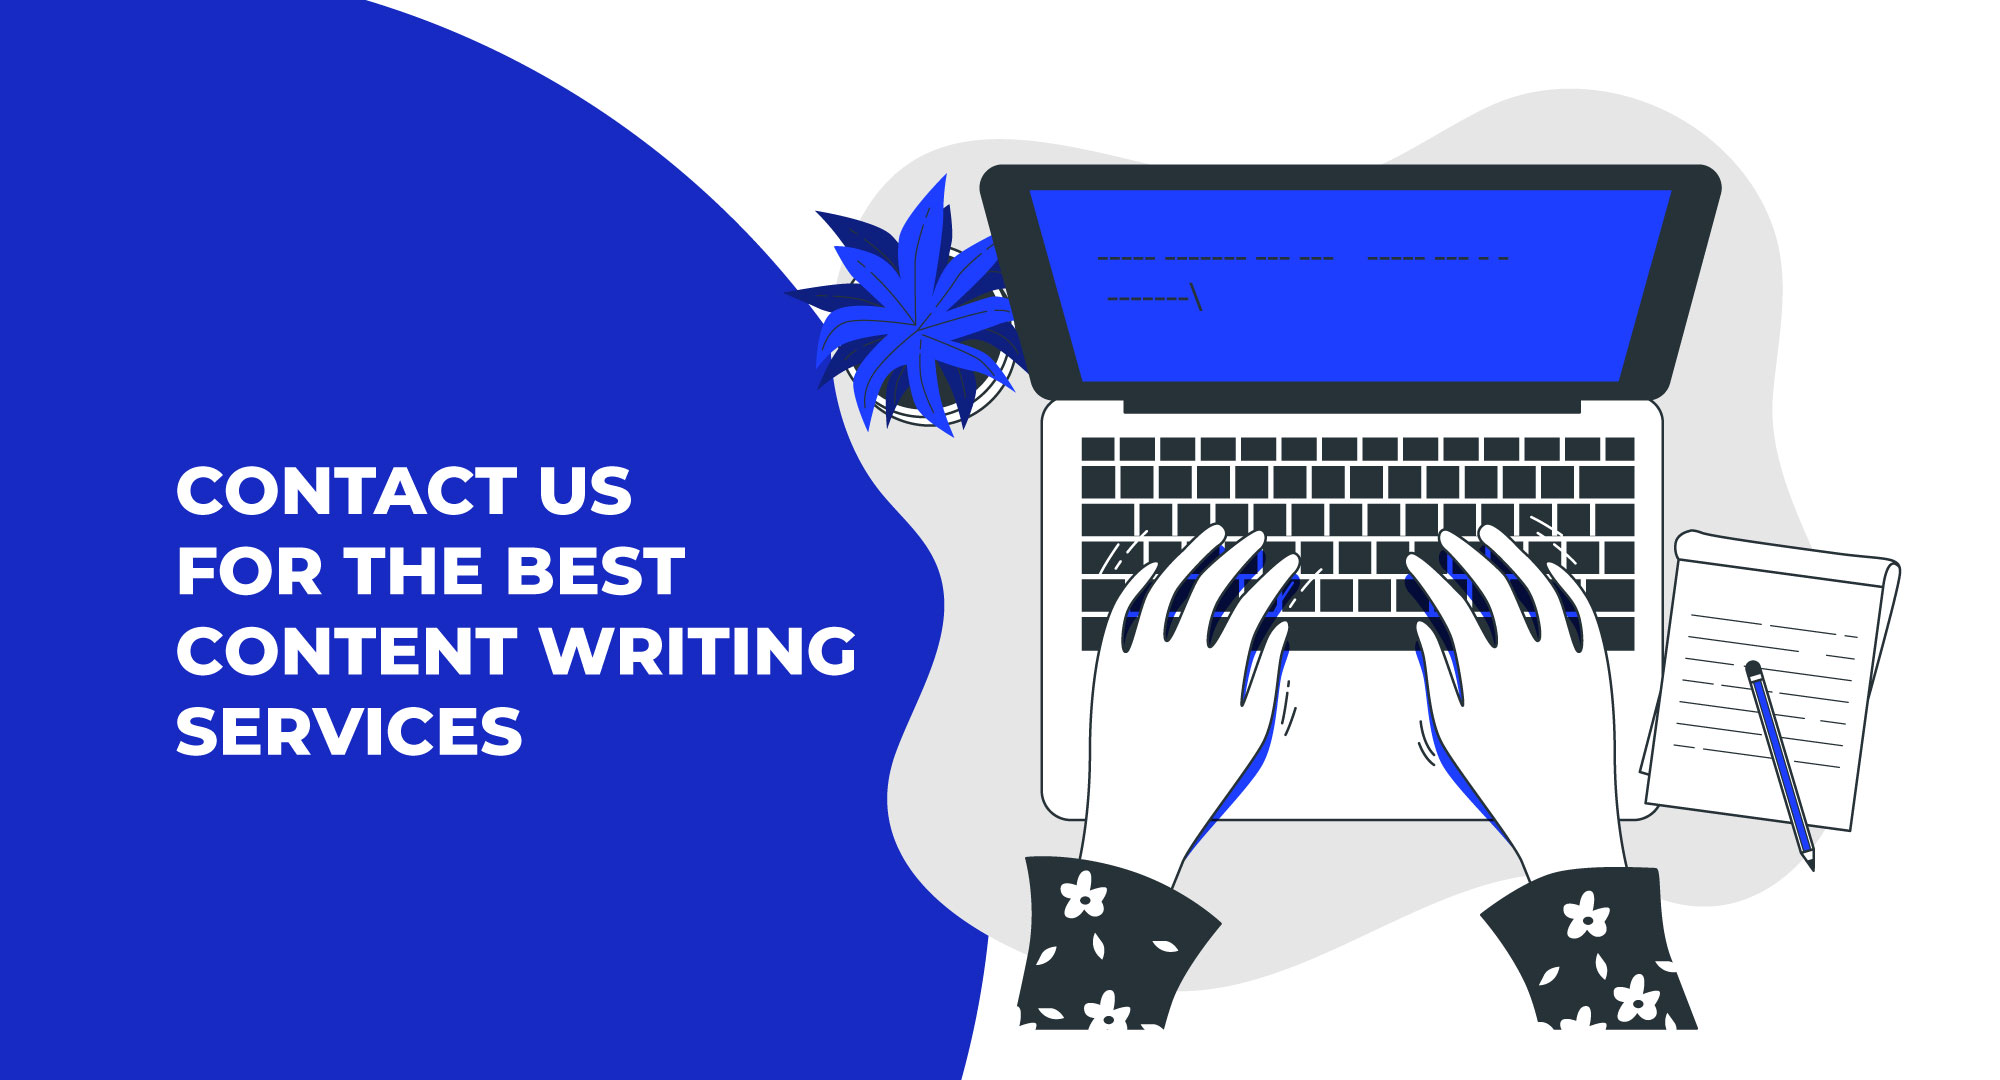 Ready to Promote Your Brand? Contact Us for the Best Content Writing Services in the UAE